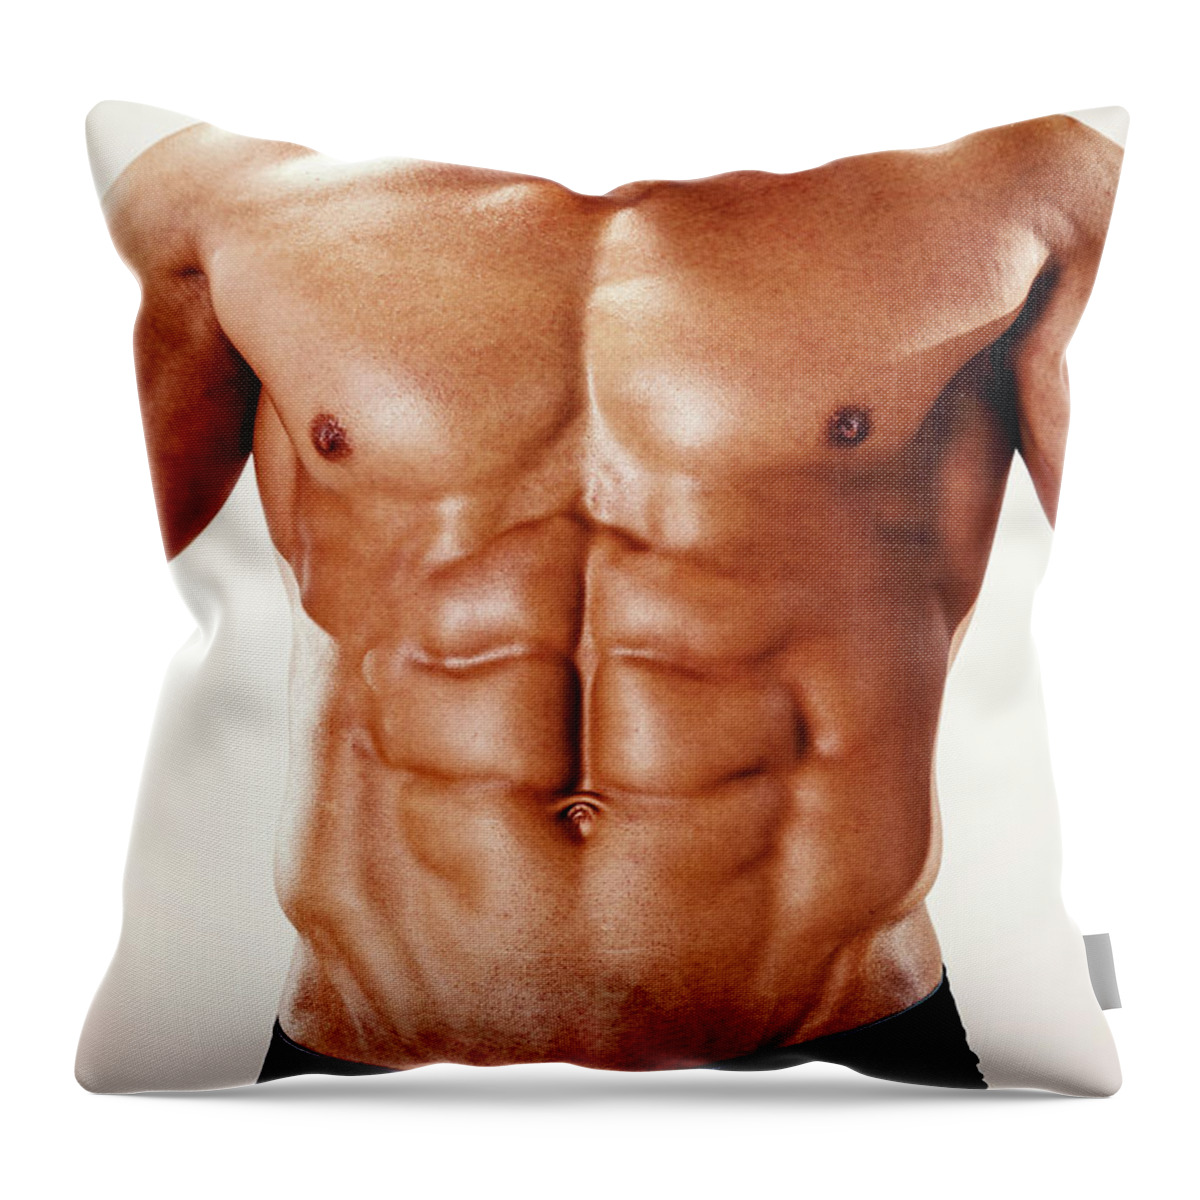 Abdominal Muscle Throw Pillow featuring the photograph Muscles by Eclipse images